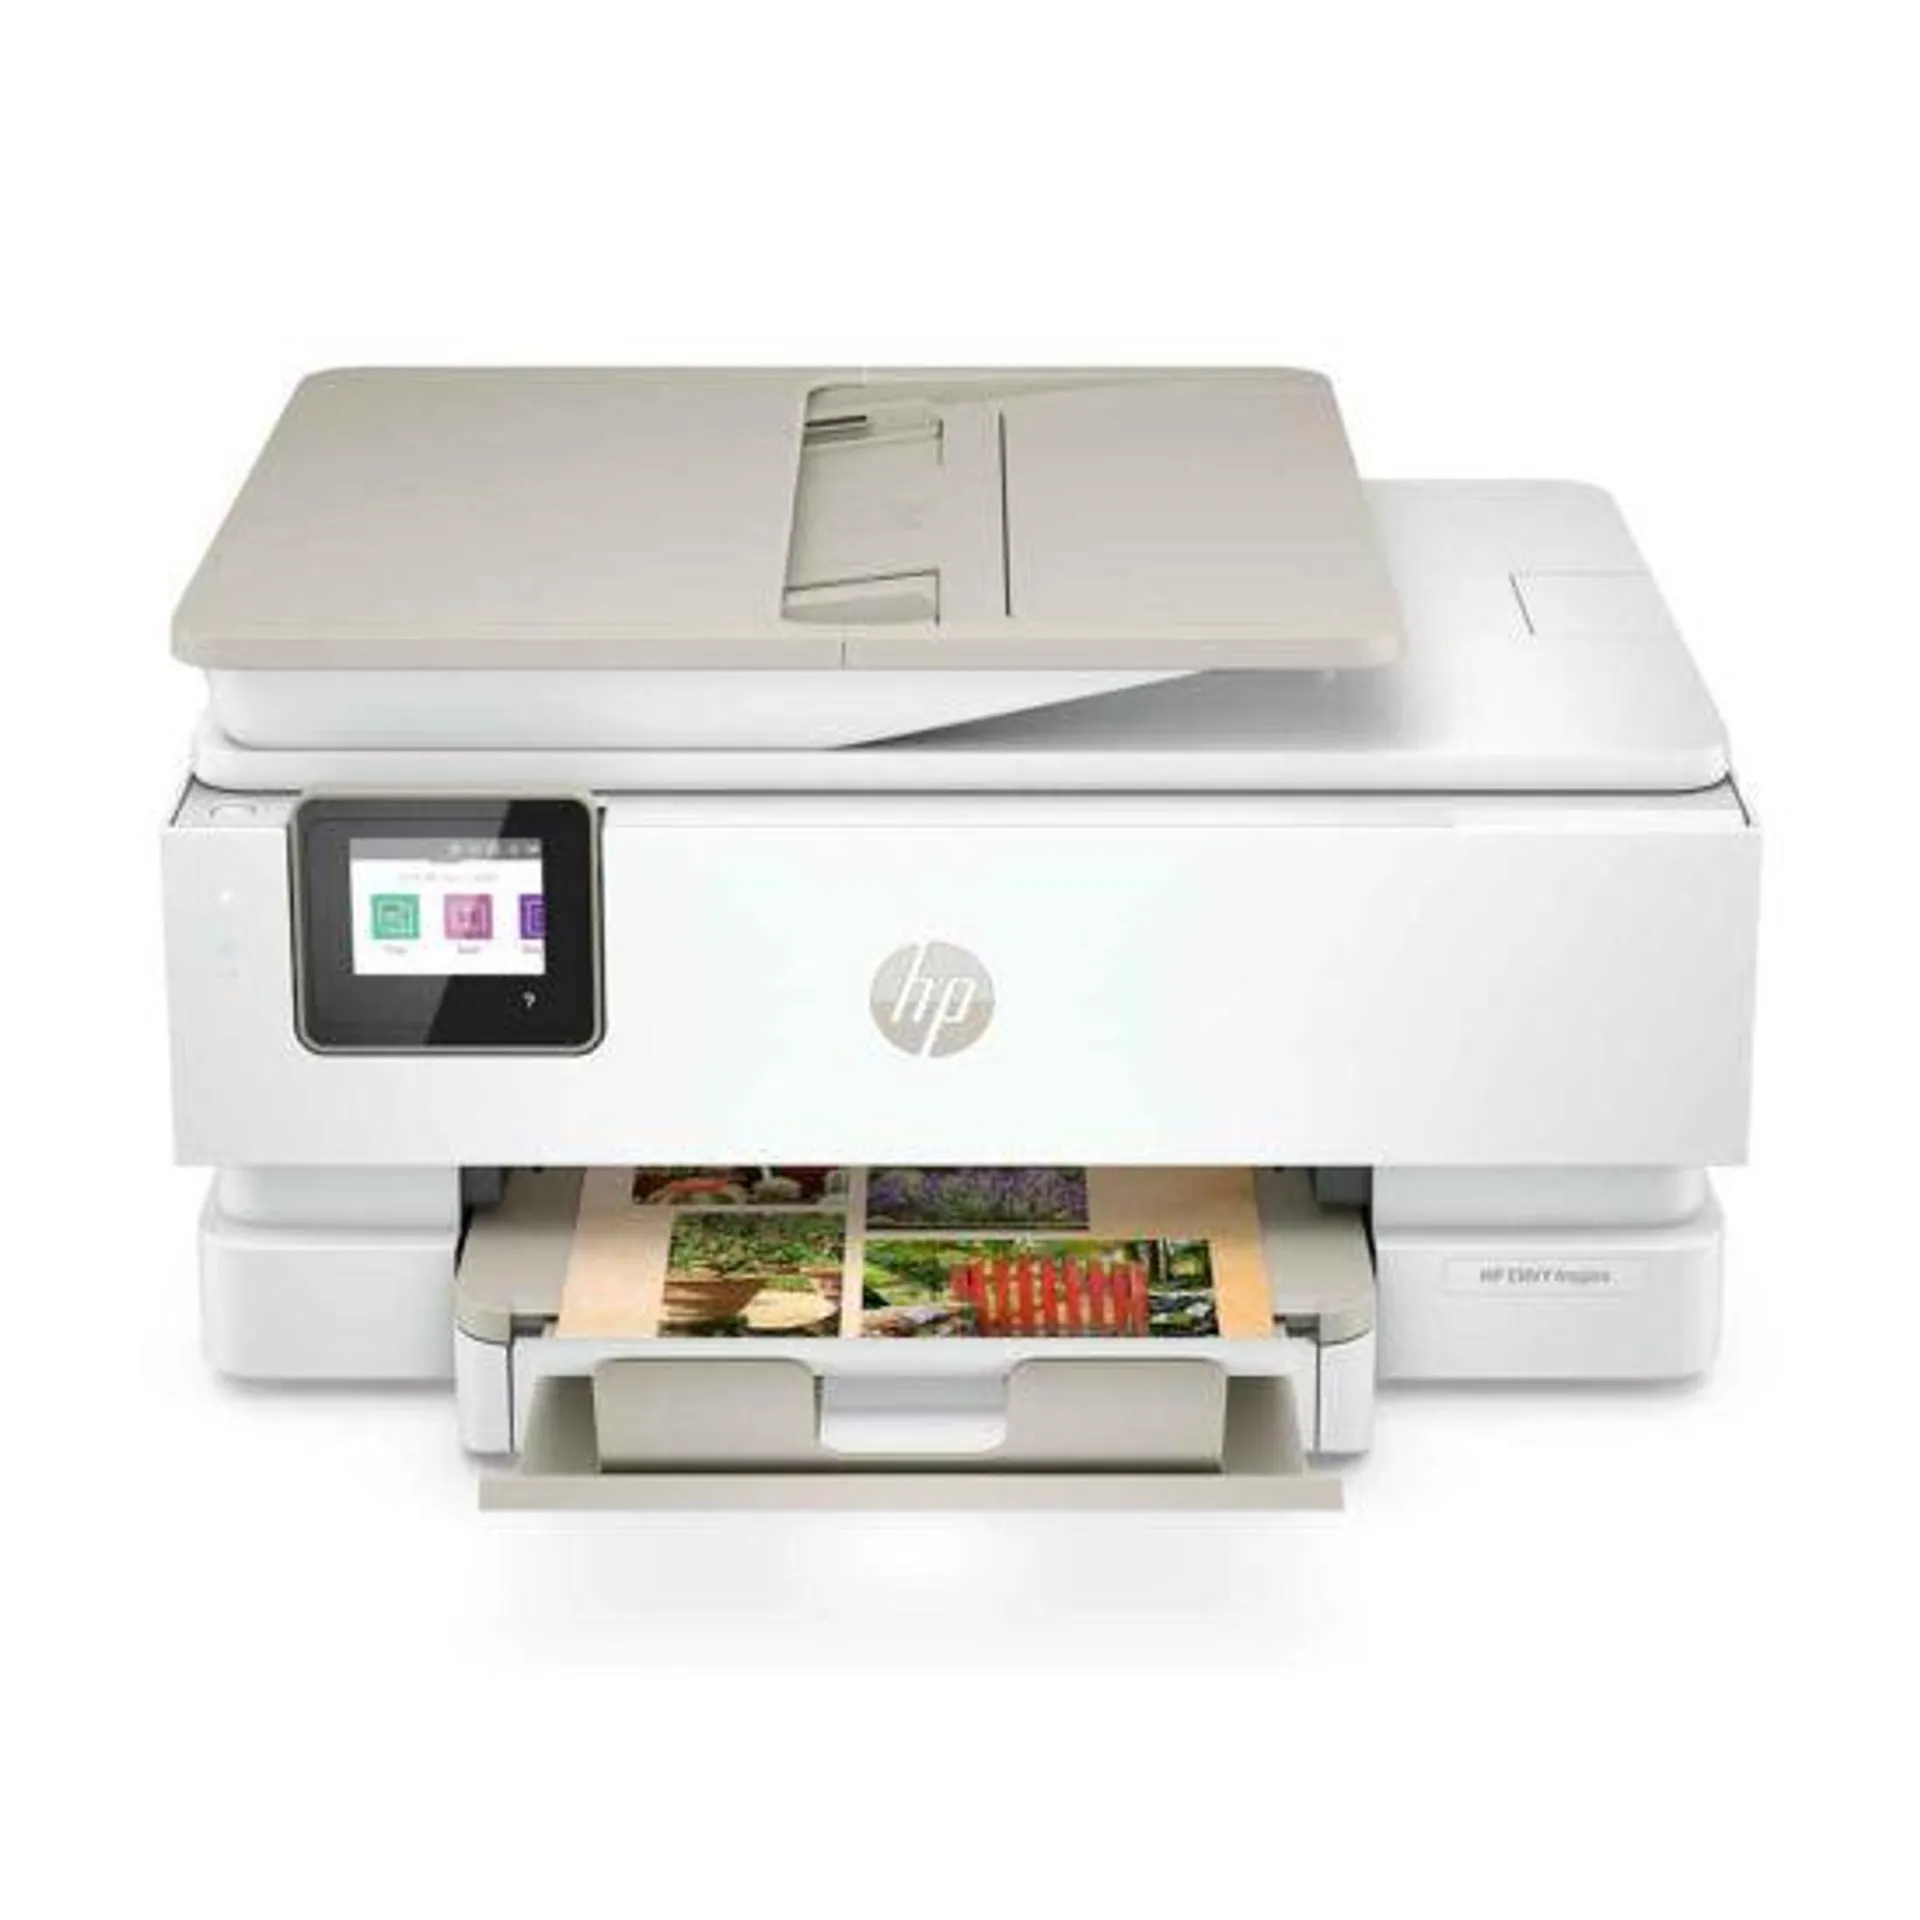 HP Envy Inspire 7920e All In One Wireless Inkjet Printer with HP Plus and Instant Ink Ready